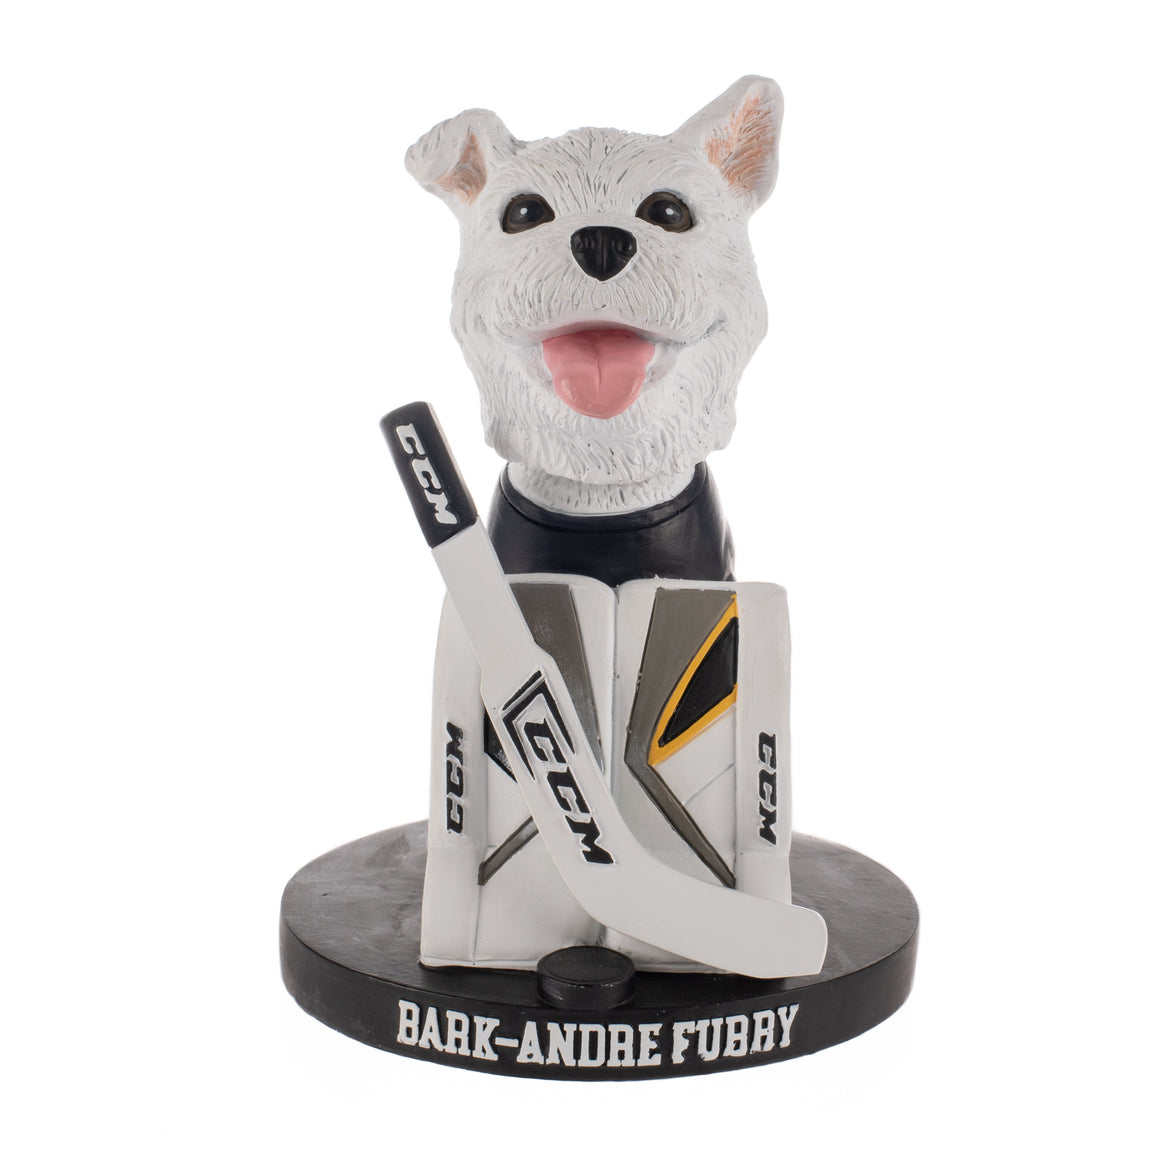 Sponsor a Bobblehead for a Hospitalized Child